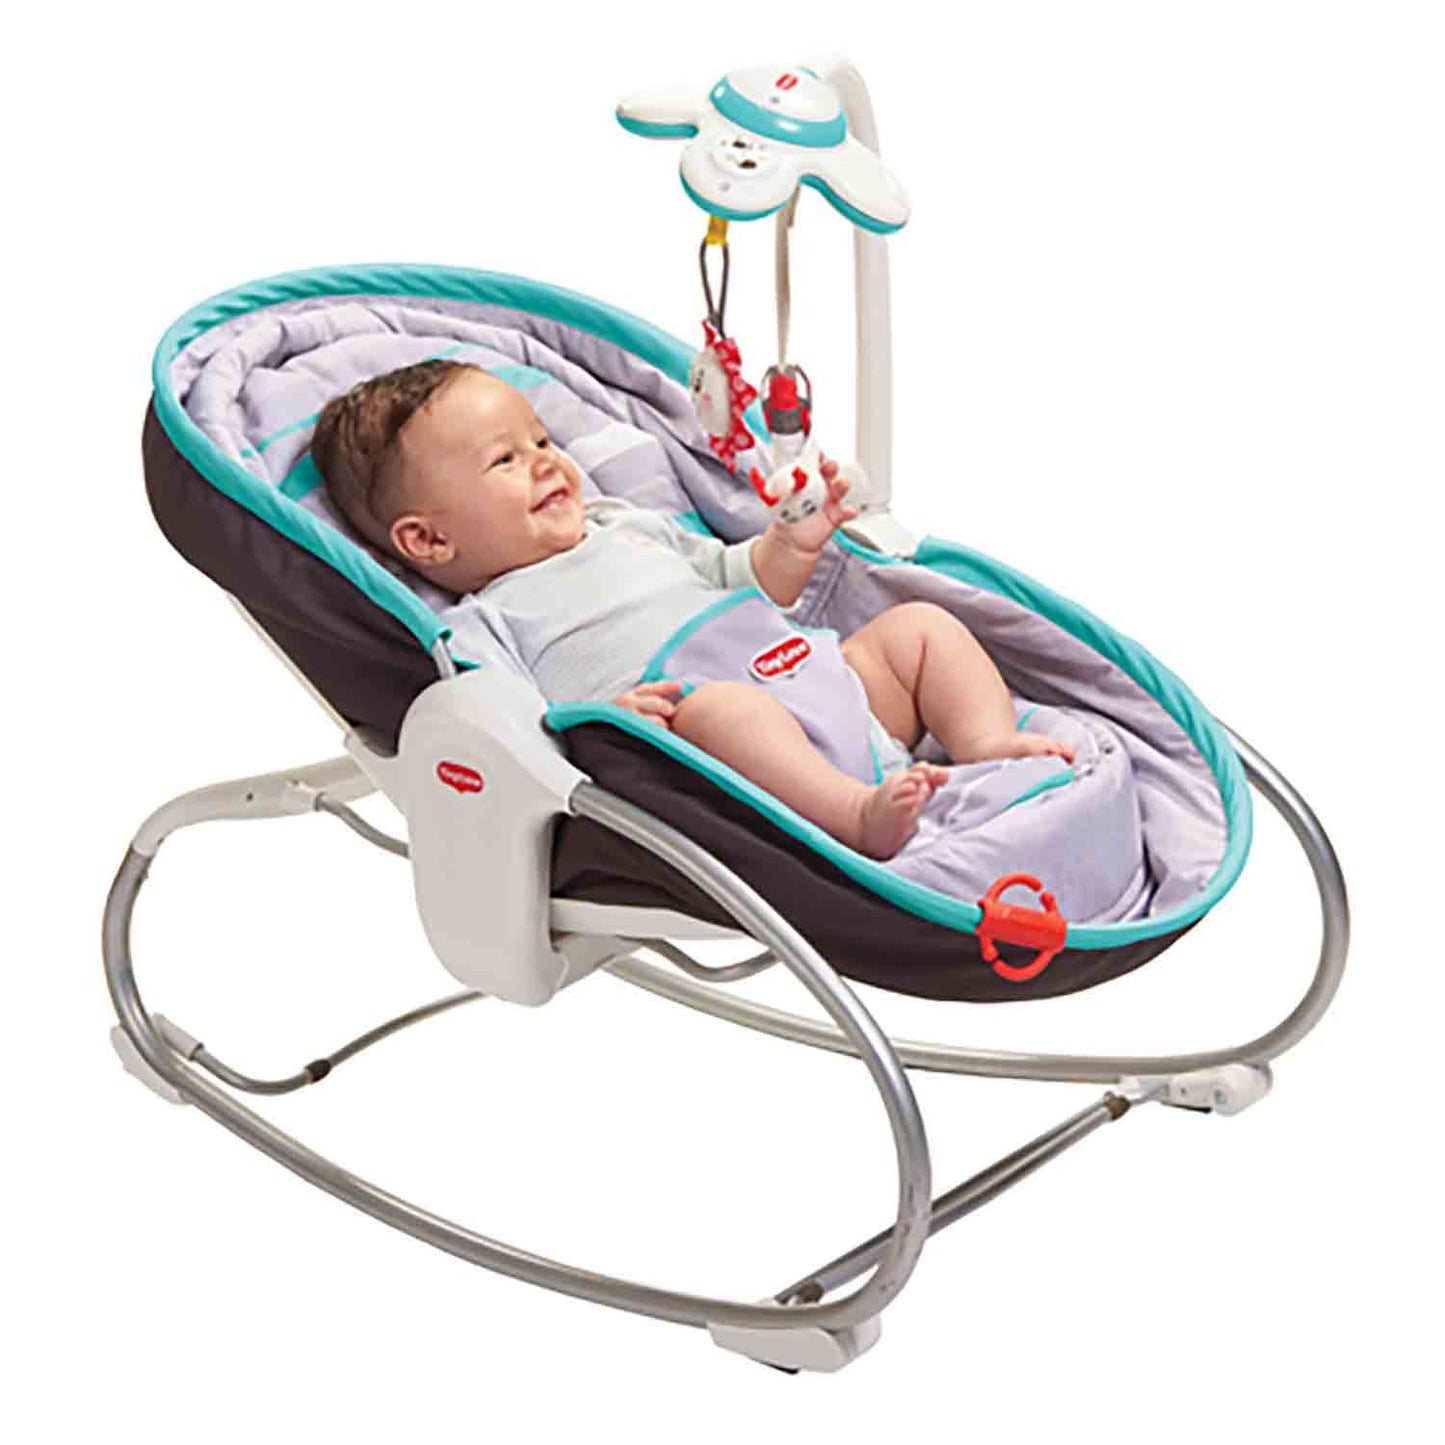 3-In-1 Rocker Napper~Turquoise(Without Packing)